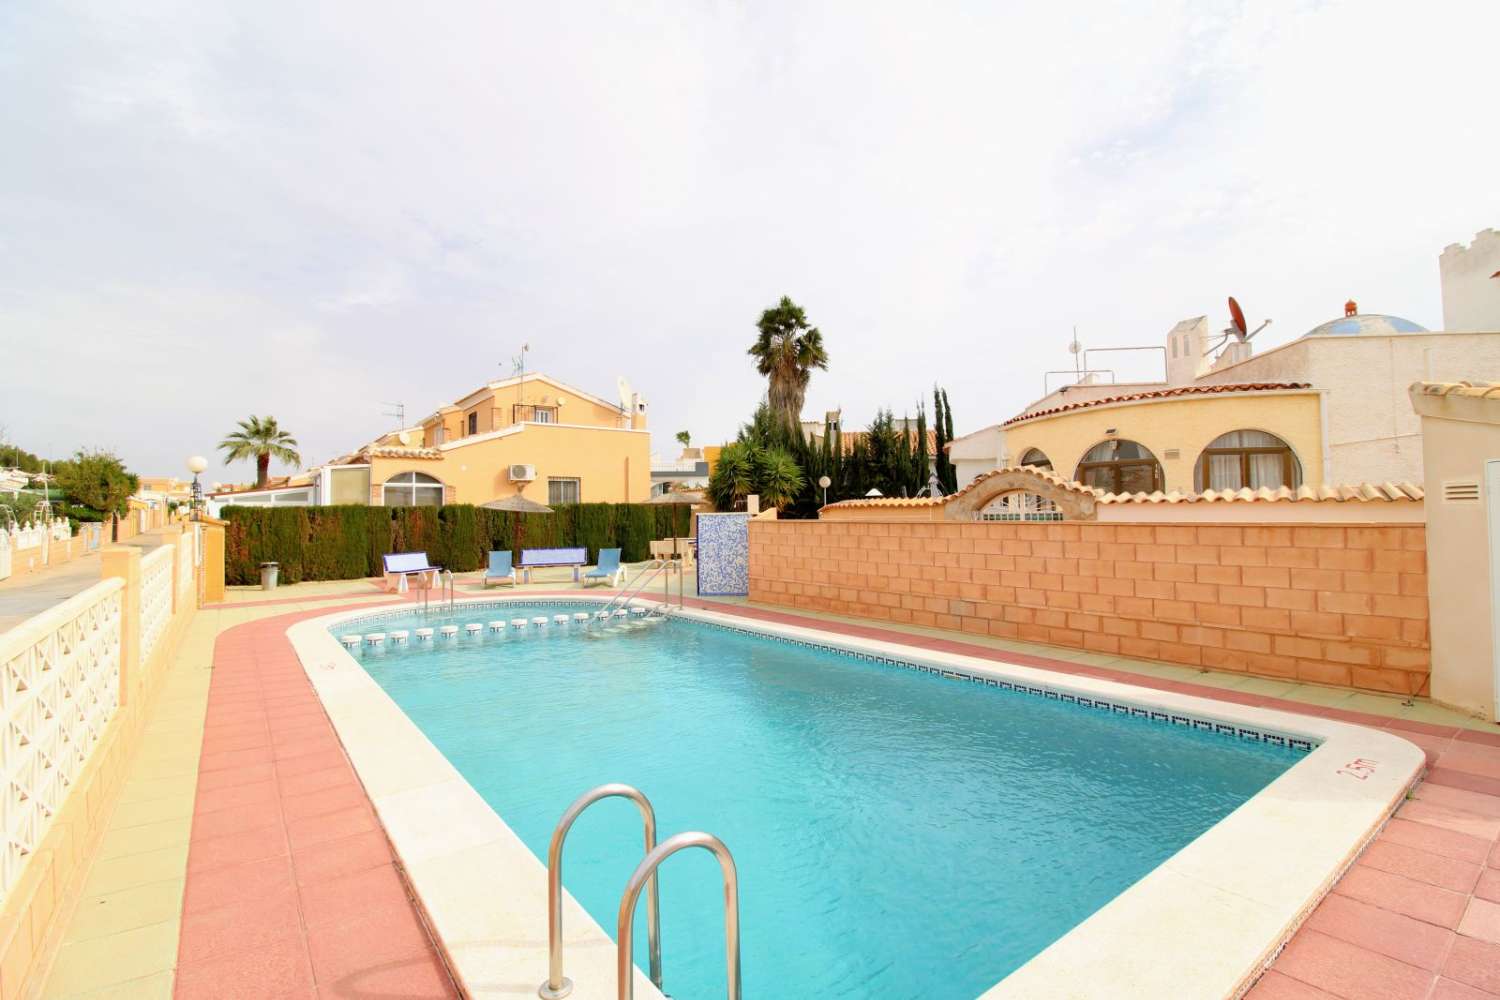 BEAUTIFUL DETACHED HOUSE WITH DRIVEWAY IN LAS MIMOSAS (ORIHUELA COSTA)